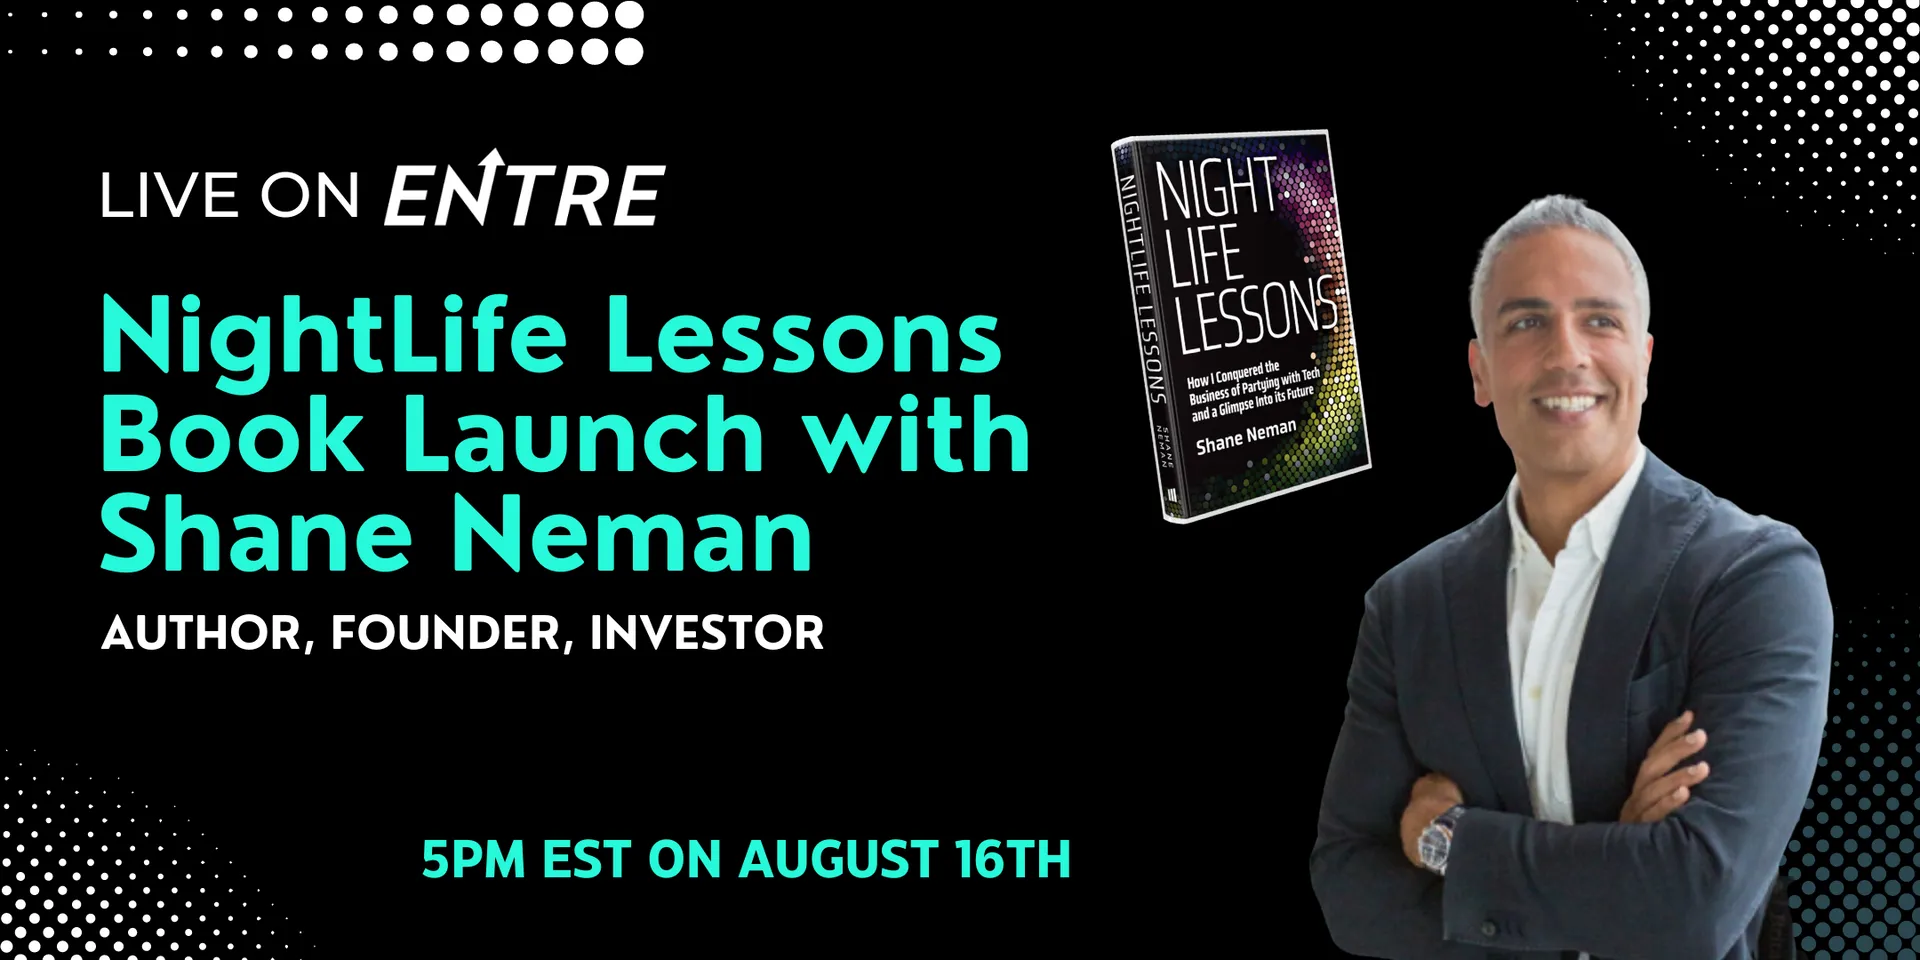 NightLife Lessons Book Launch 🚀

with <@5xIgp7NjAnfJO7J6cXpRvl4sBmY2> 🎙️

TODAY at 5pm EST 🚨

Join here 👇
https://joinentre.com/event/5efea1a2-d3cb-42f6-9710-0c43eefbc69e